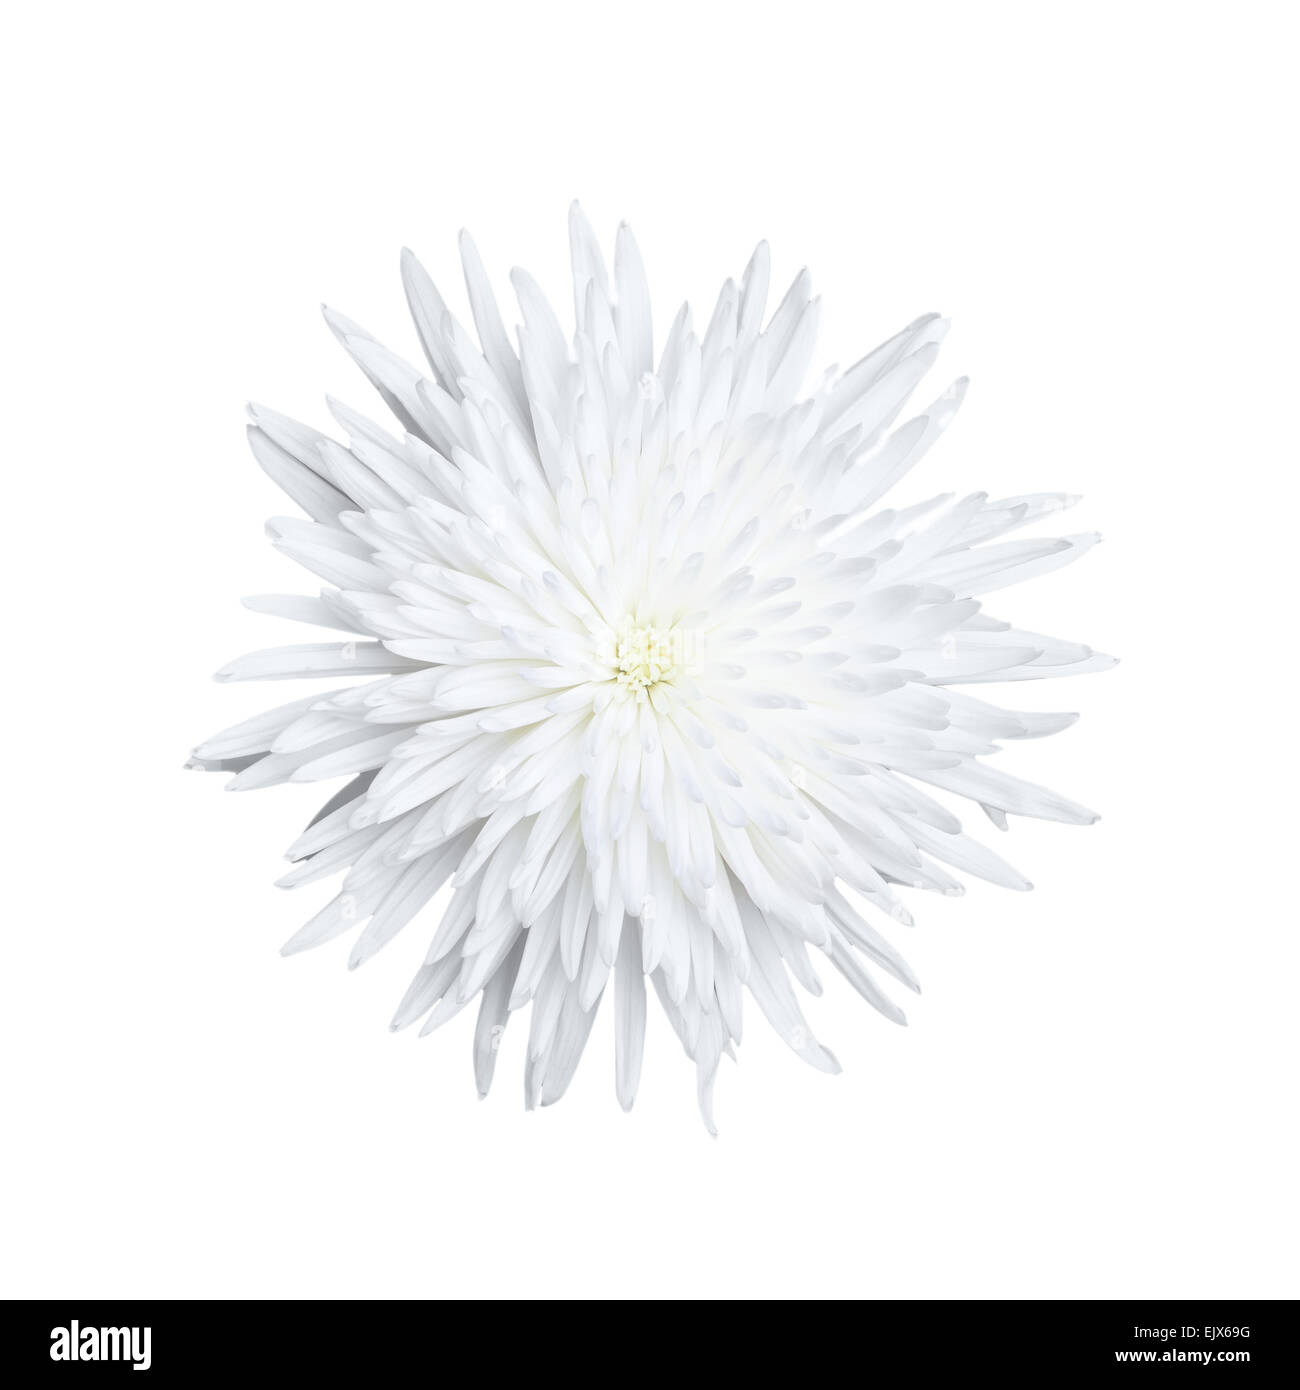 One Chrysanthemum flower isolated on white background, top view Stock Photo